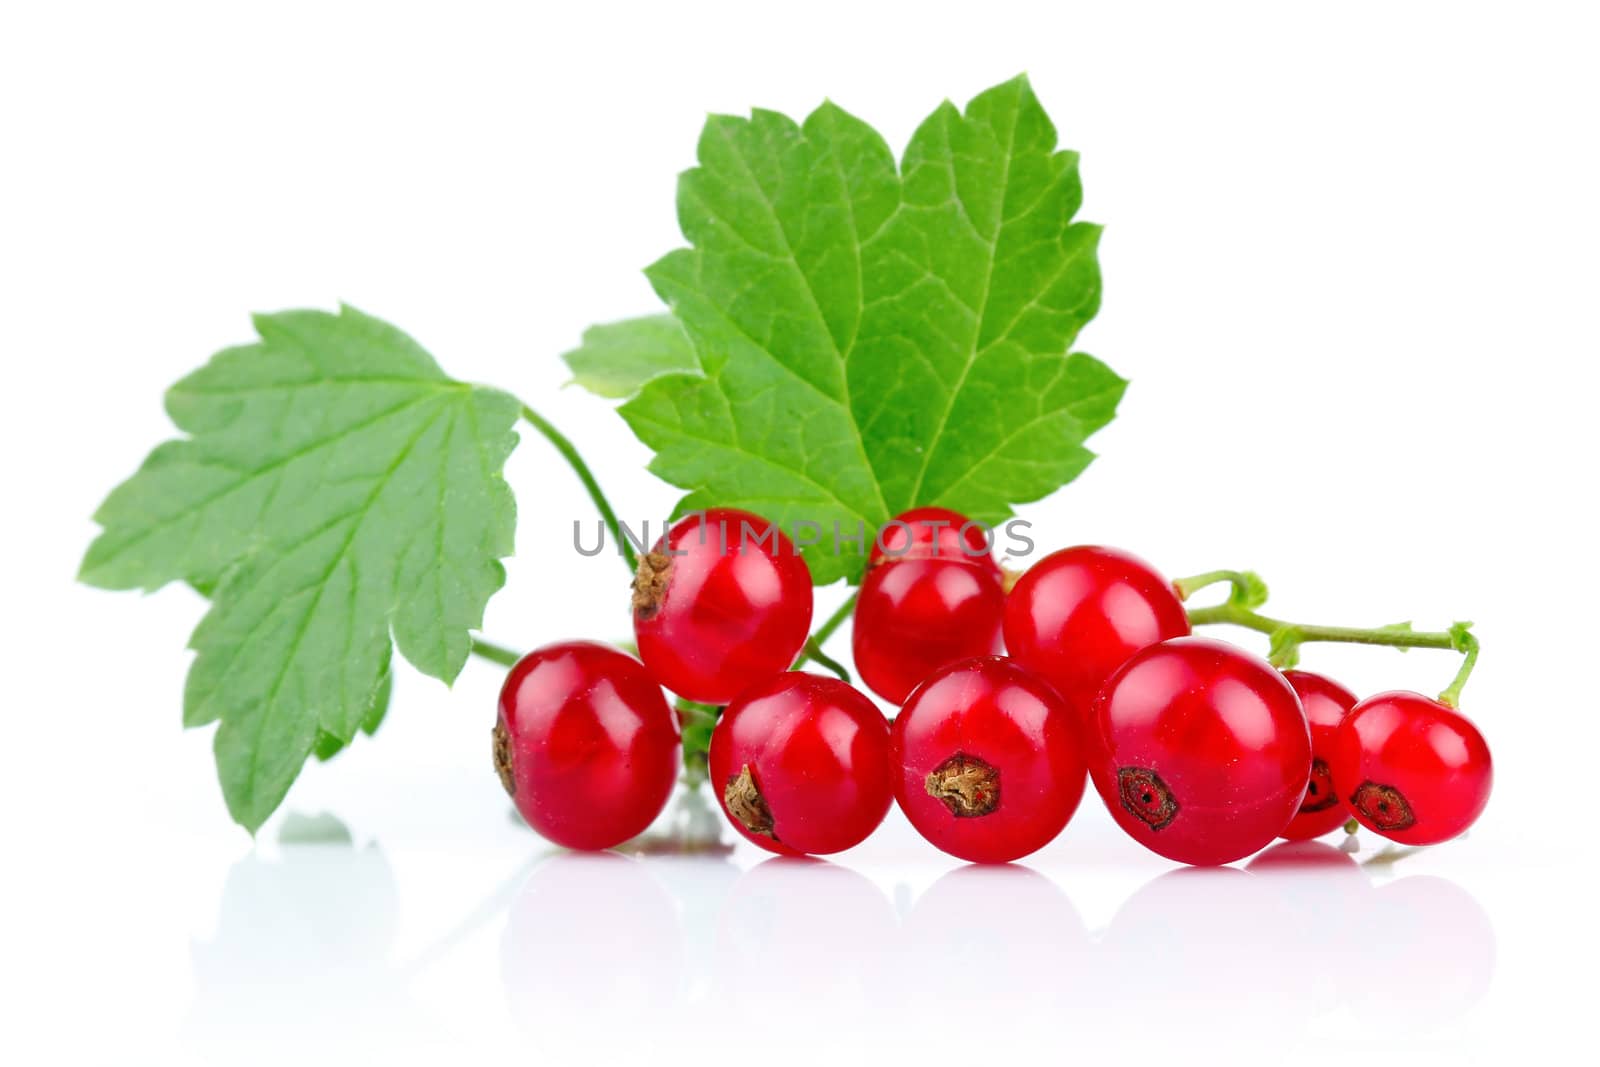 Bunch of red currants with green leaves isolated on white